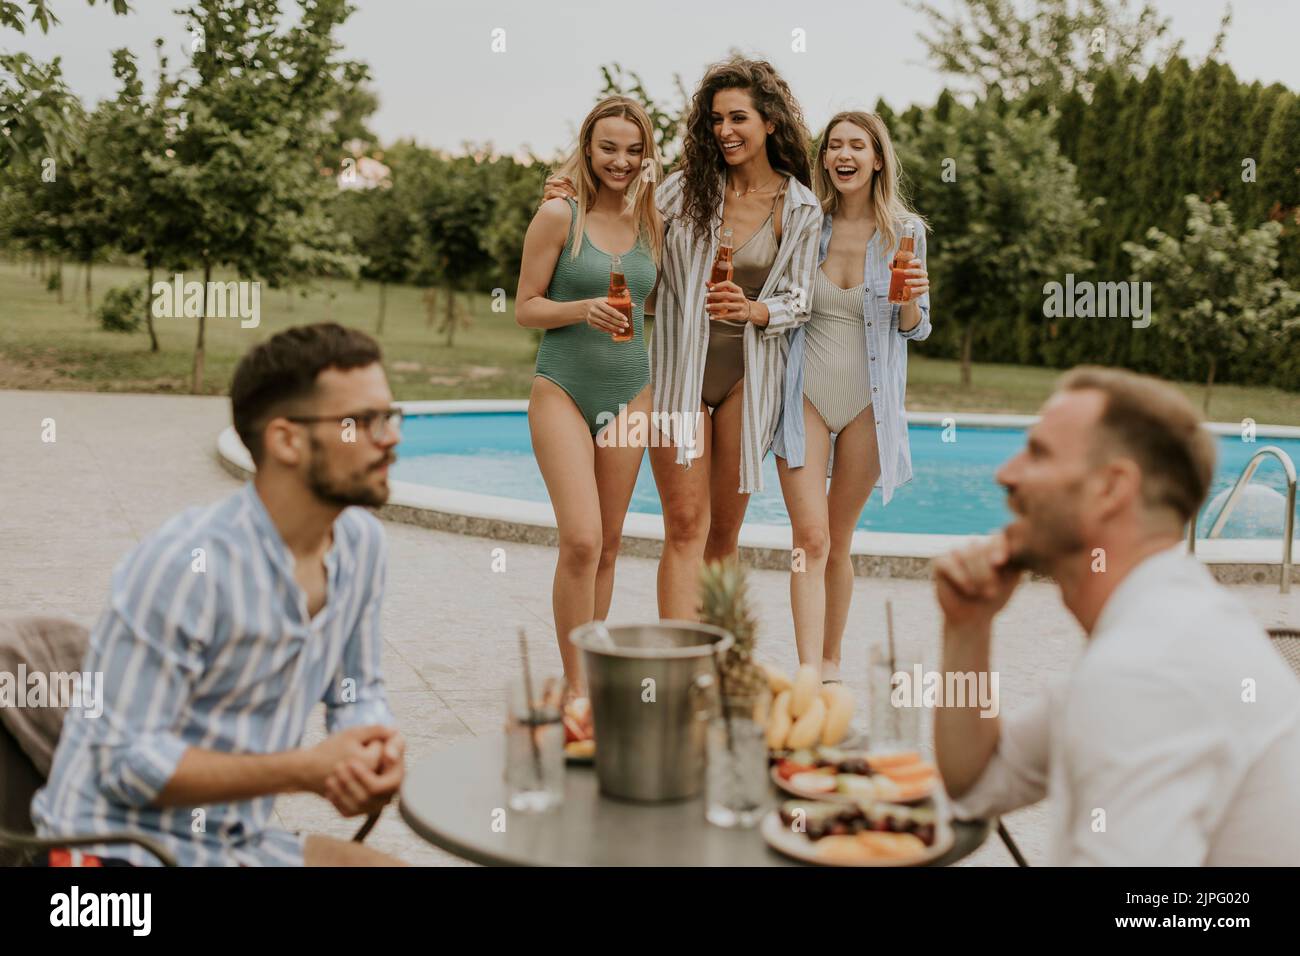 Group of happy young people cheering with drinks and eating fruits by the pool in the garden Stock Photo